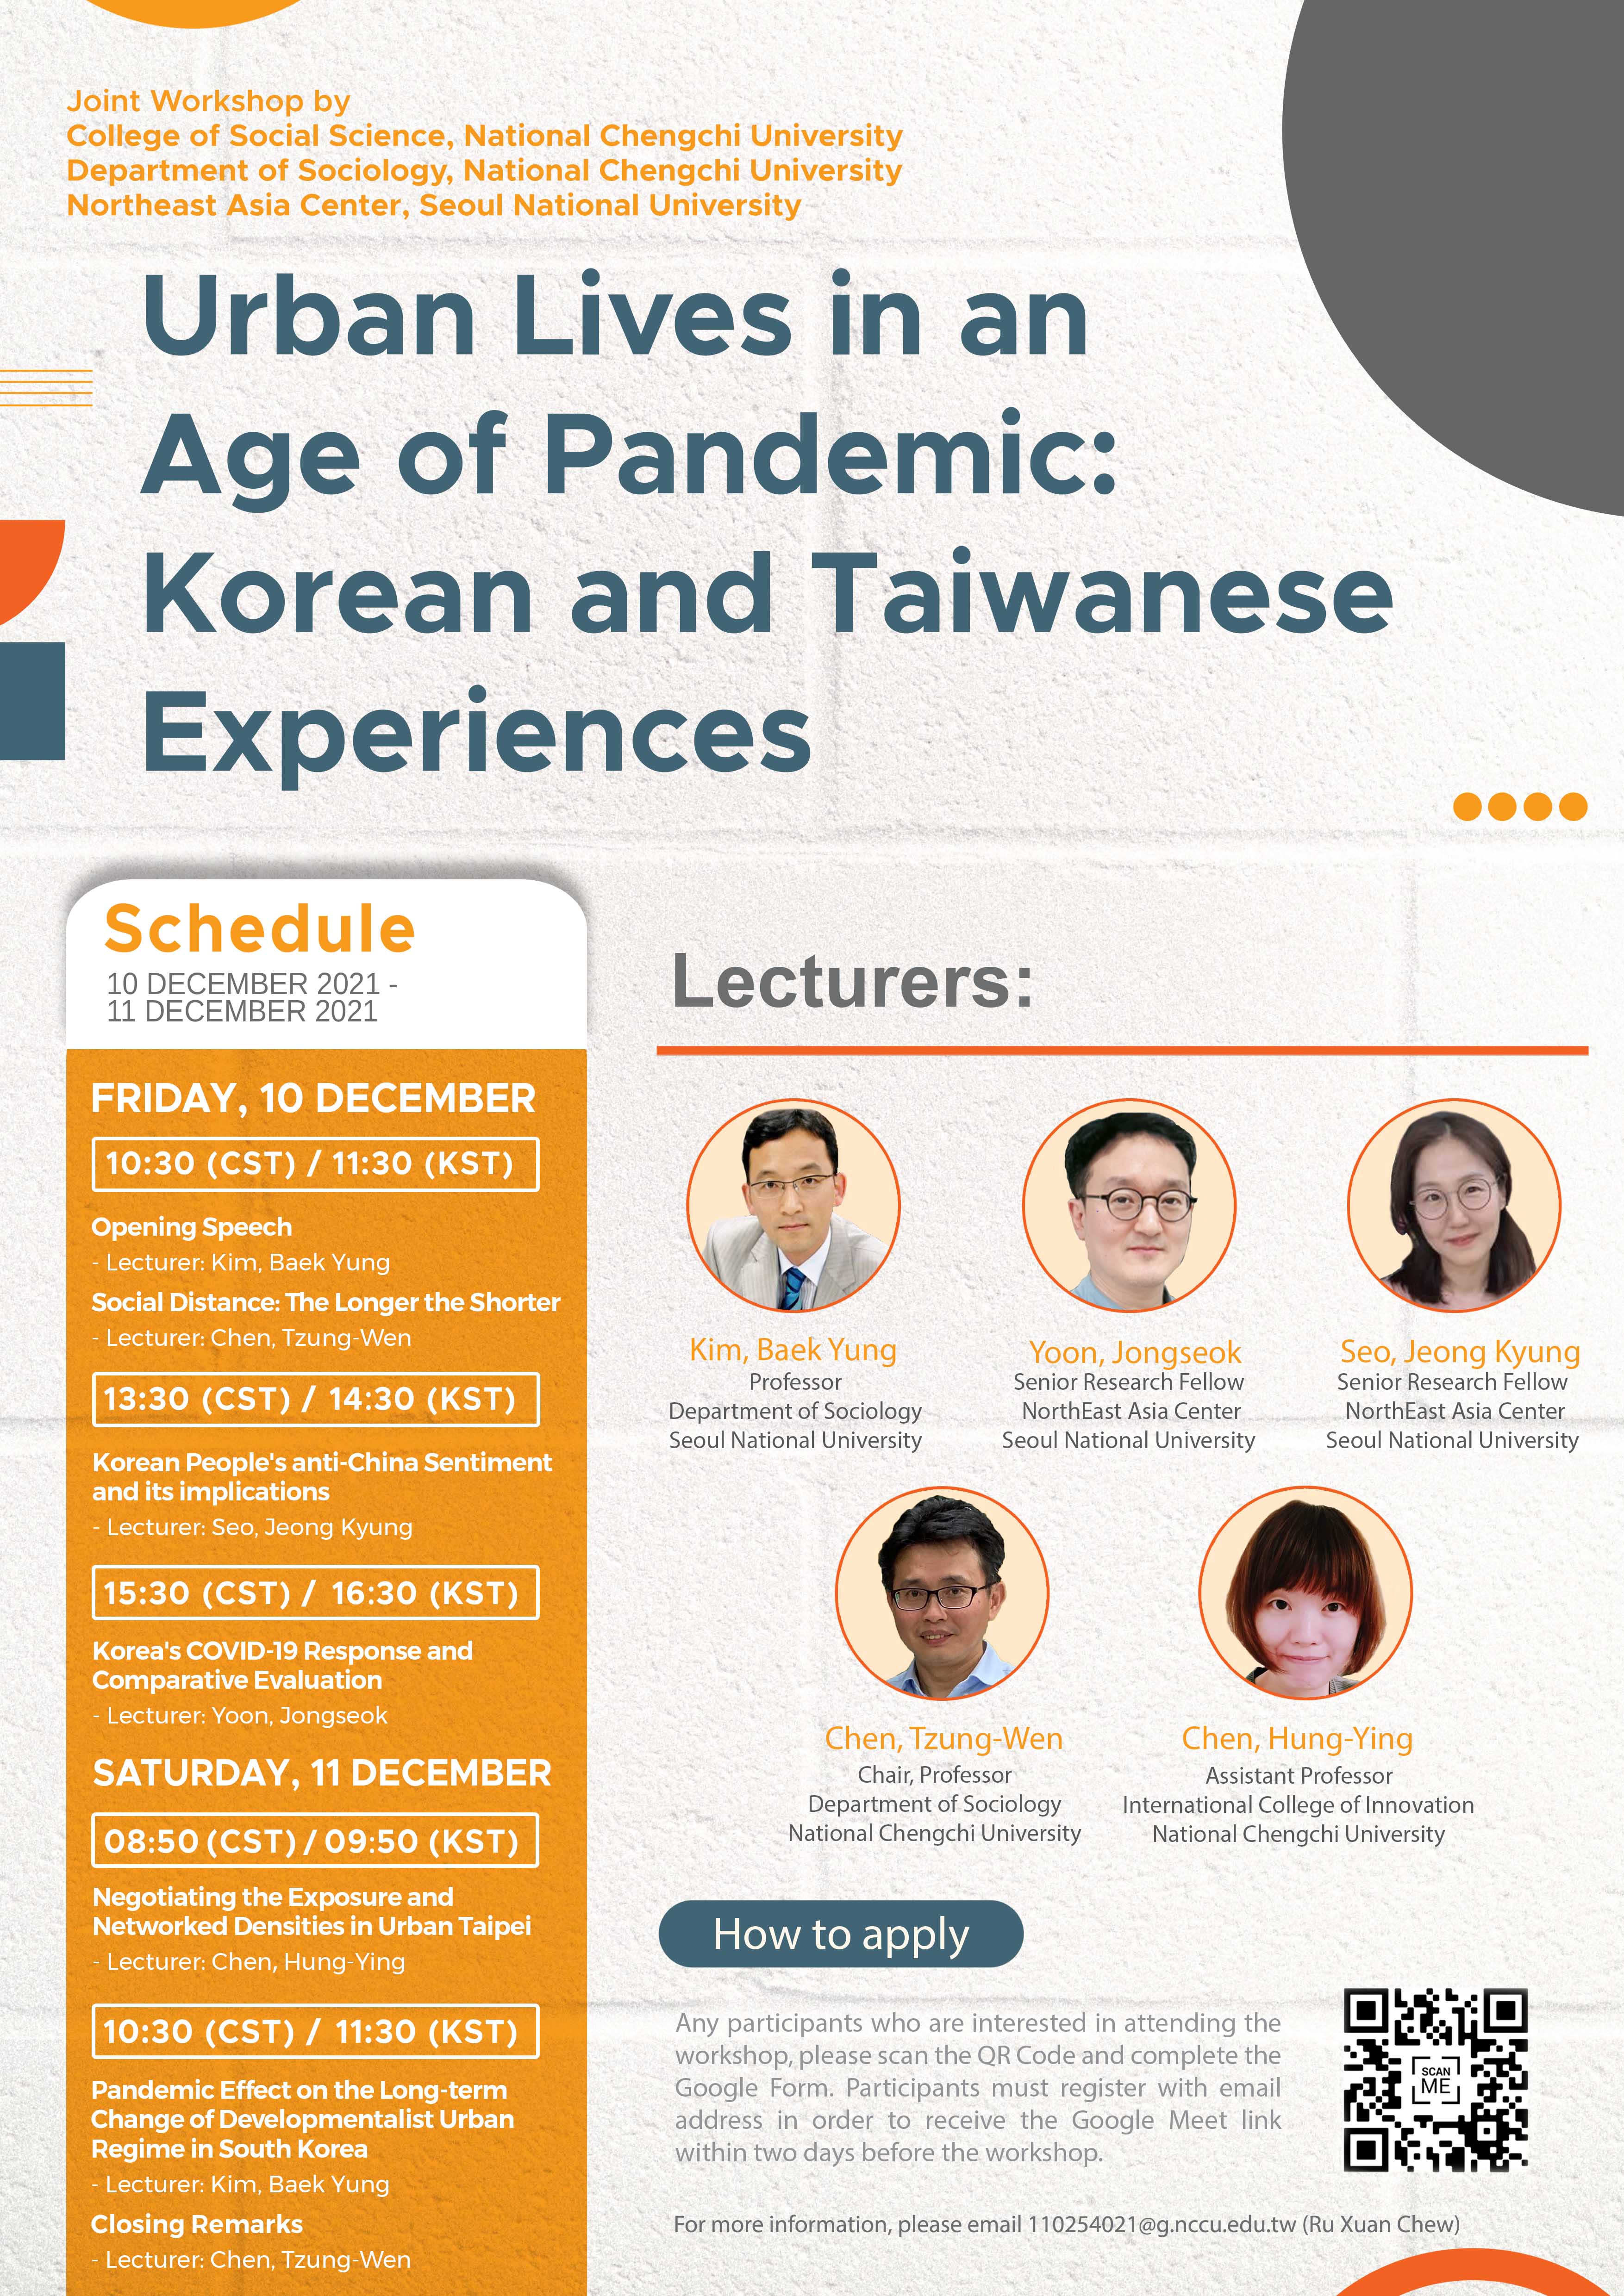 “Urban Lives in an Age of Pandemic: Korean and Taiwanese Experiences” Workshop   